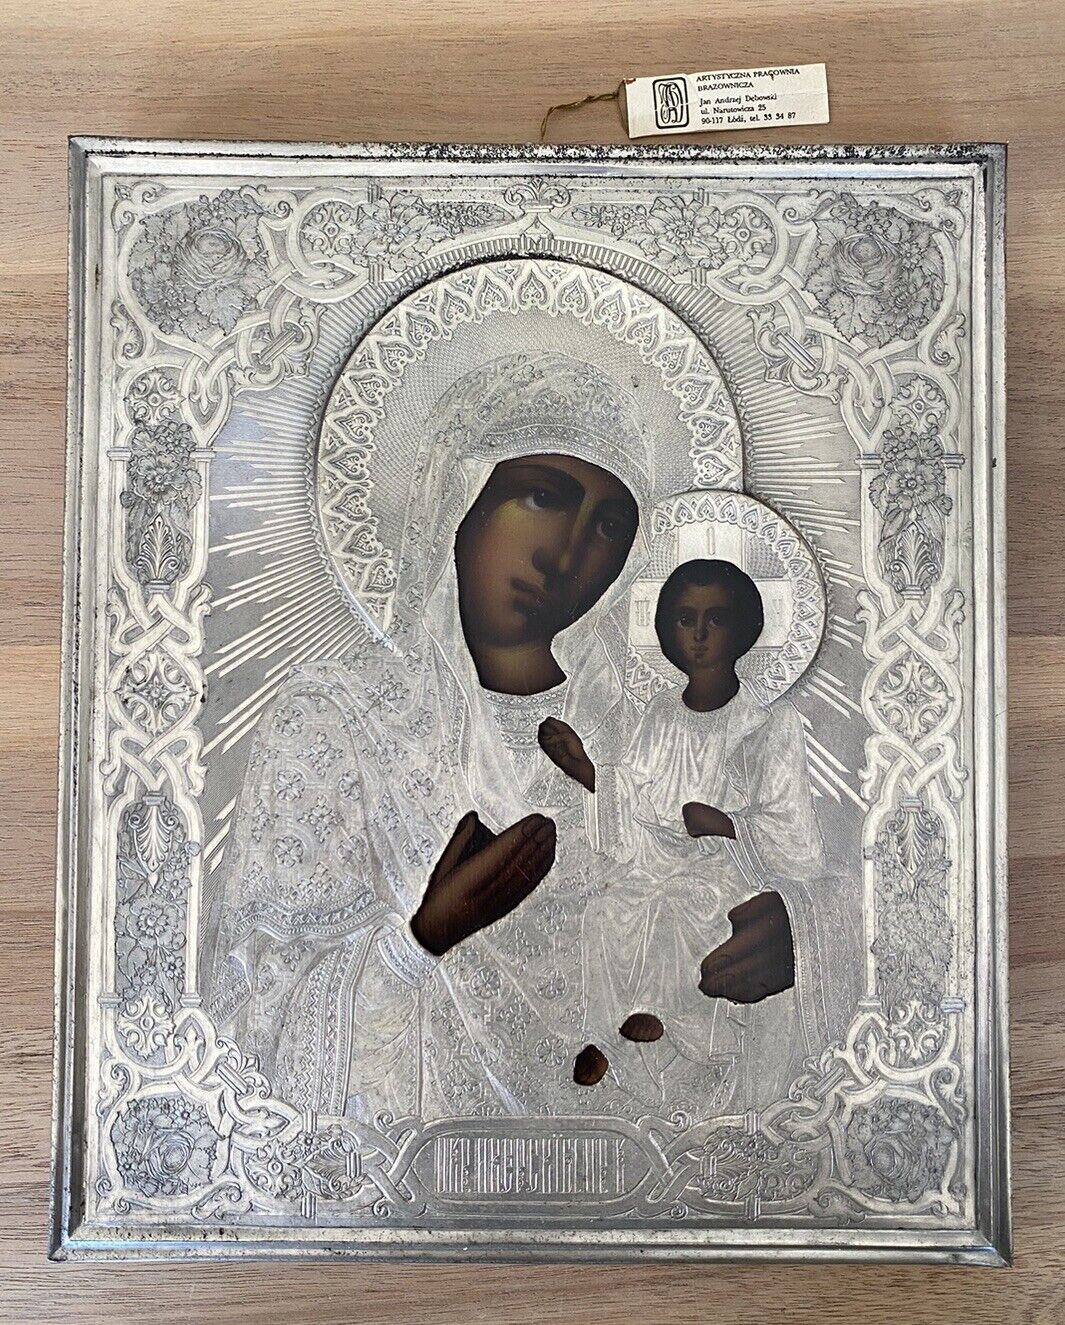 Russian Religious Icon - Mother of God - Riza Decorative Metal Wall Hanging Art